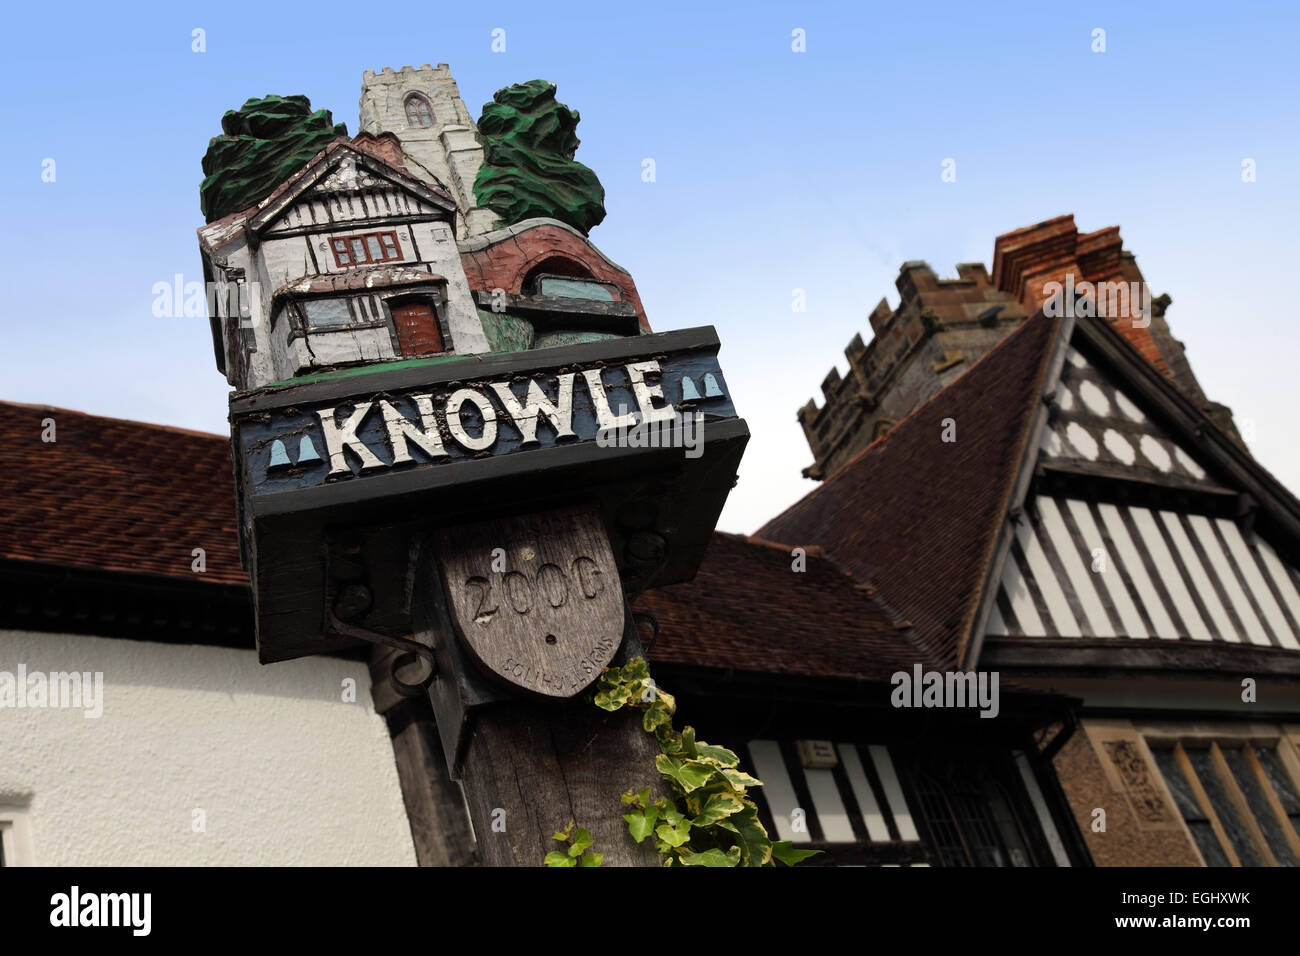 Knowle, unusual town sign, totem pole, Knowle, West Midlands Stock Photo